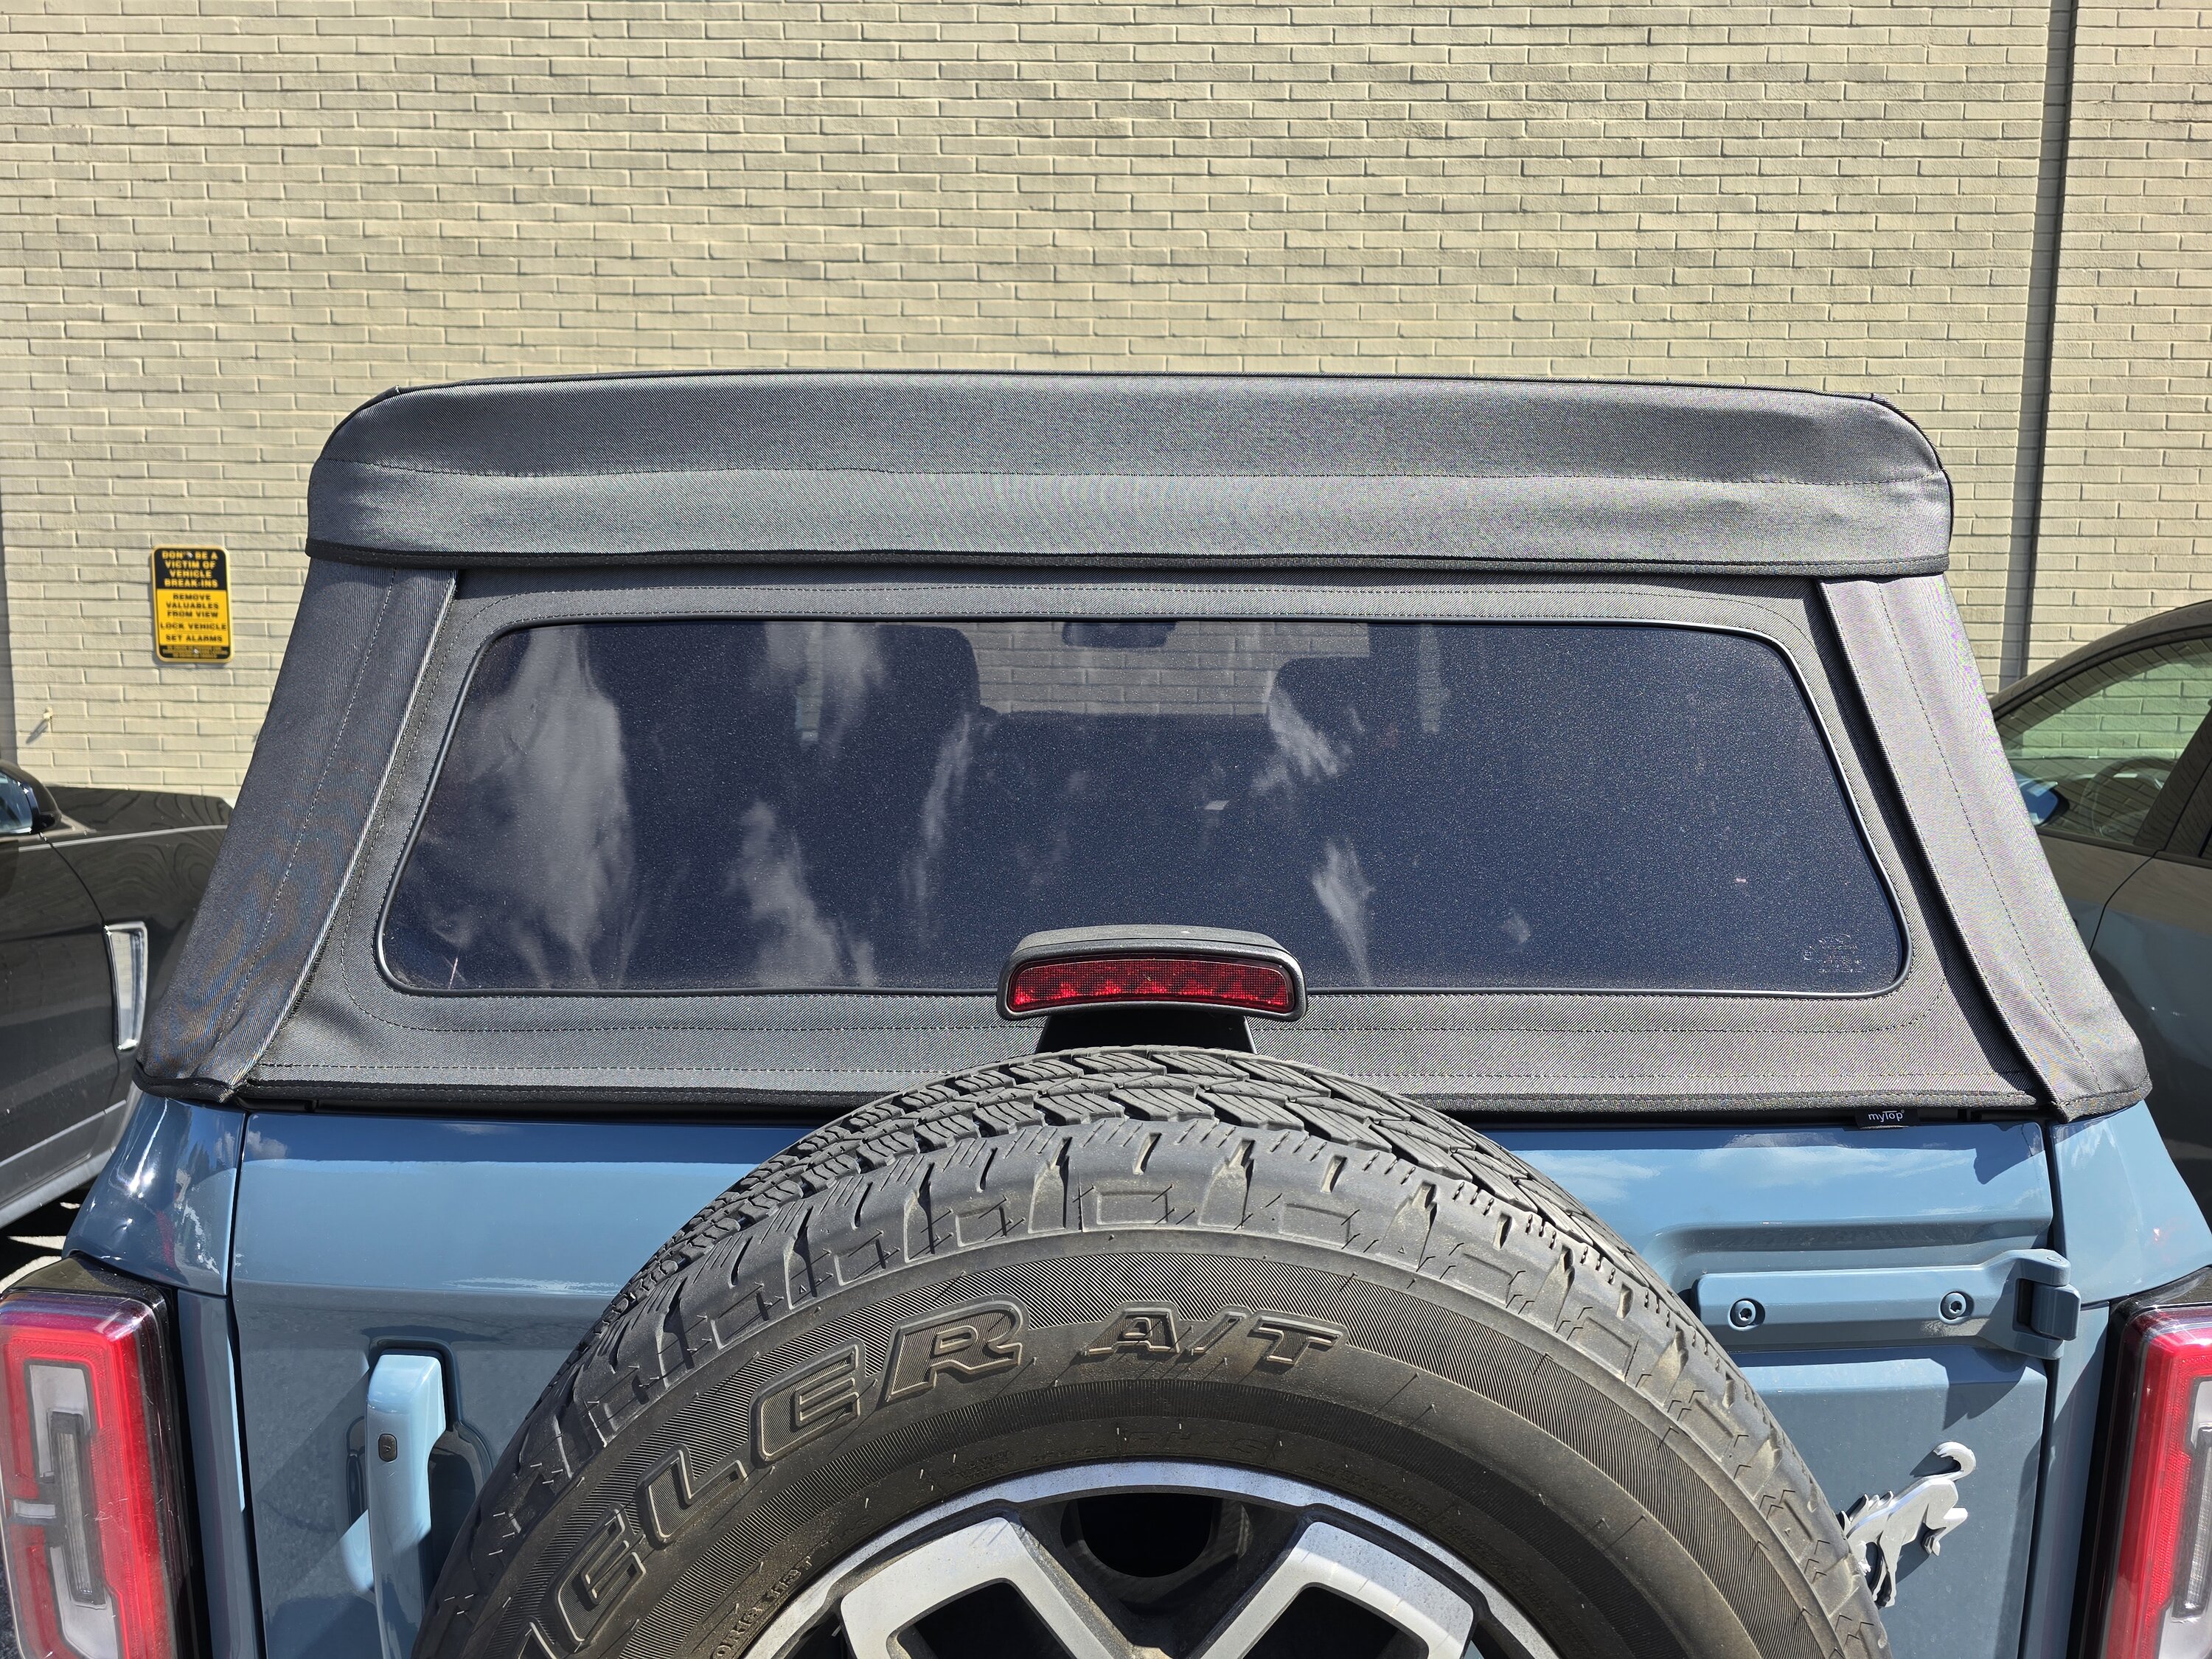 Ford Bronco myTop Electric Automatic Retracting Top made for the Bronco! 1000004605